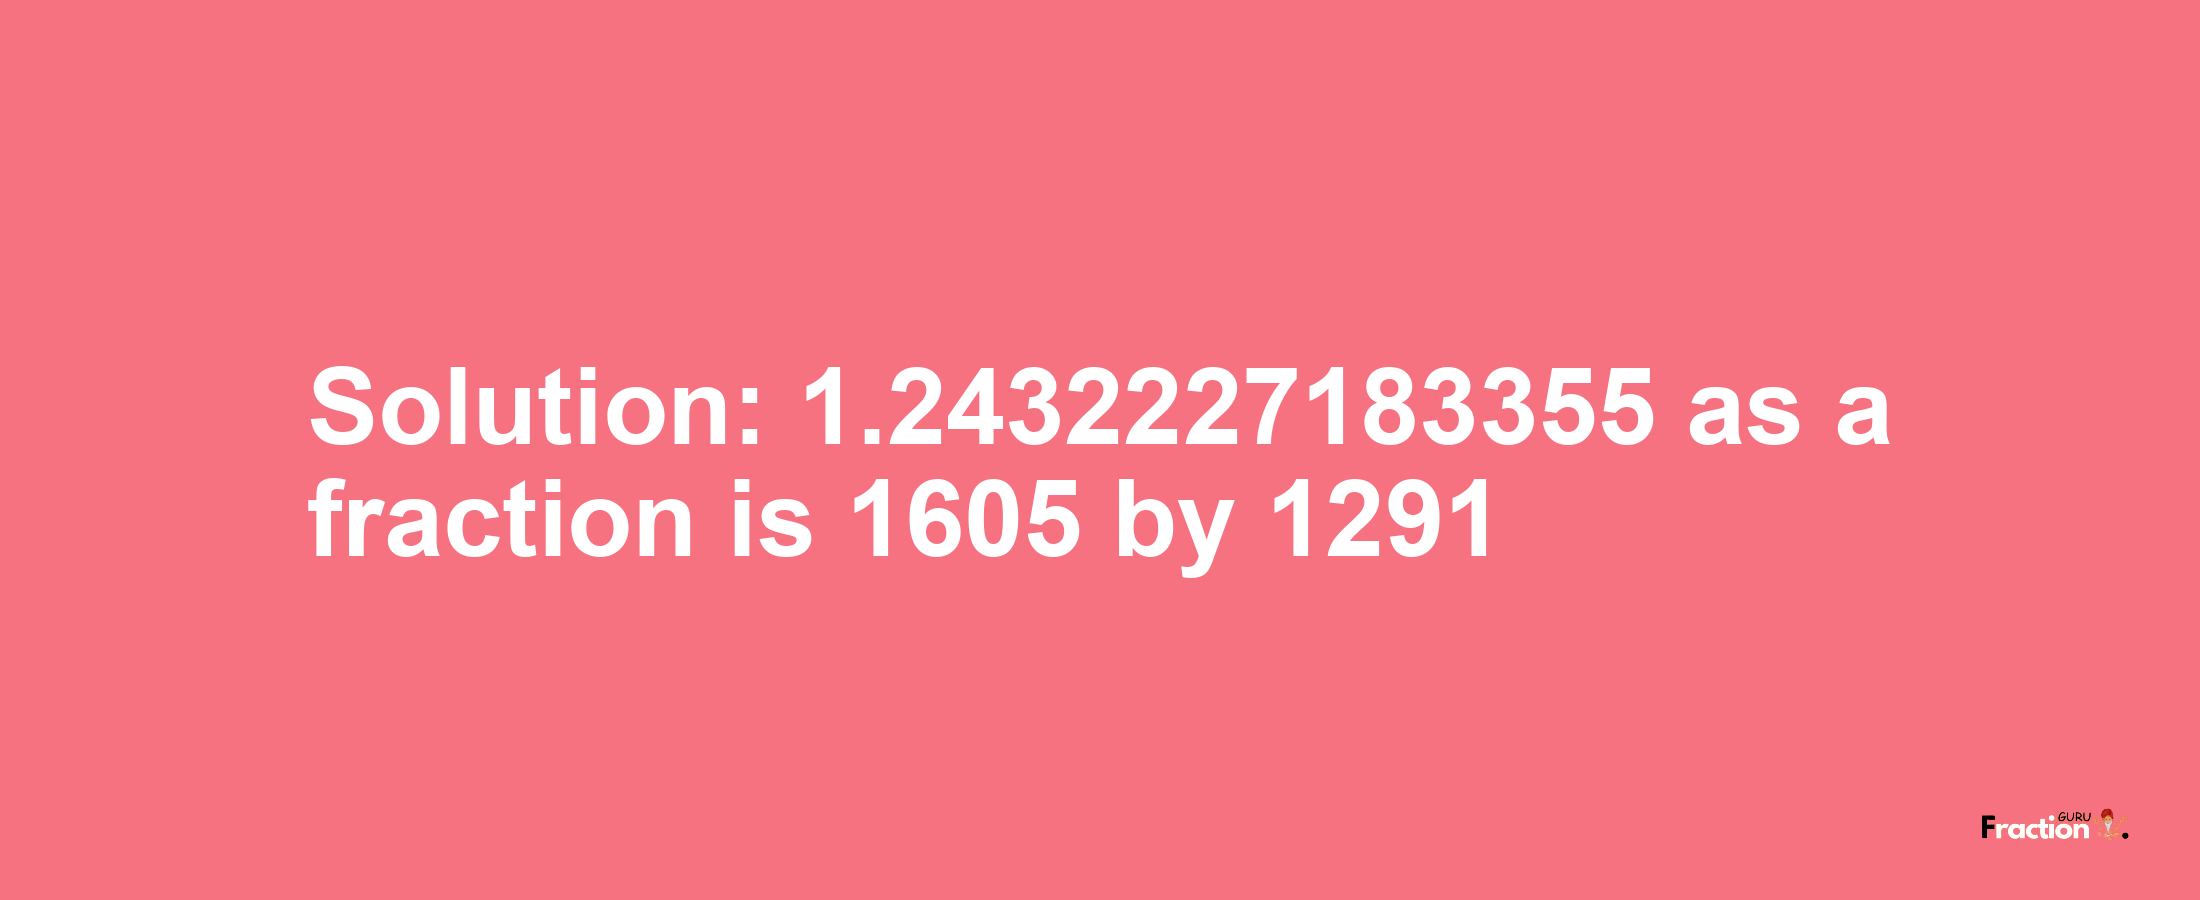 Solution:1.2432227183355 as a fraction is 1605/1291